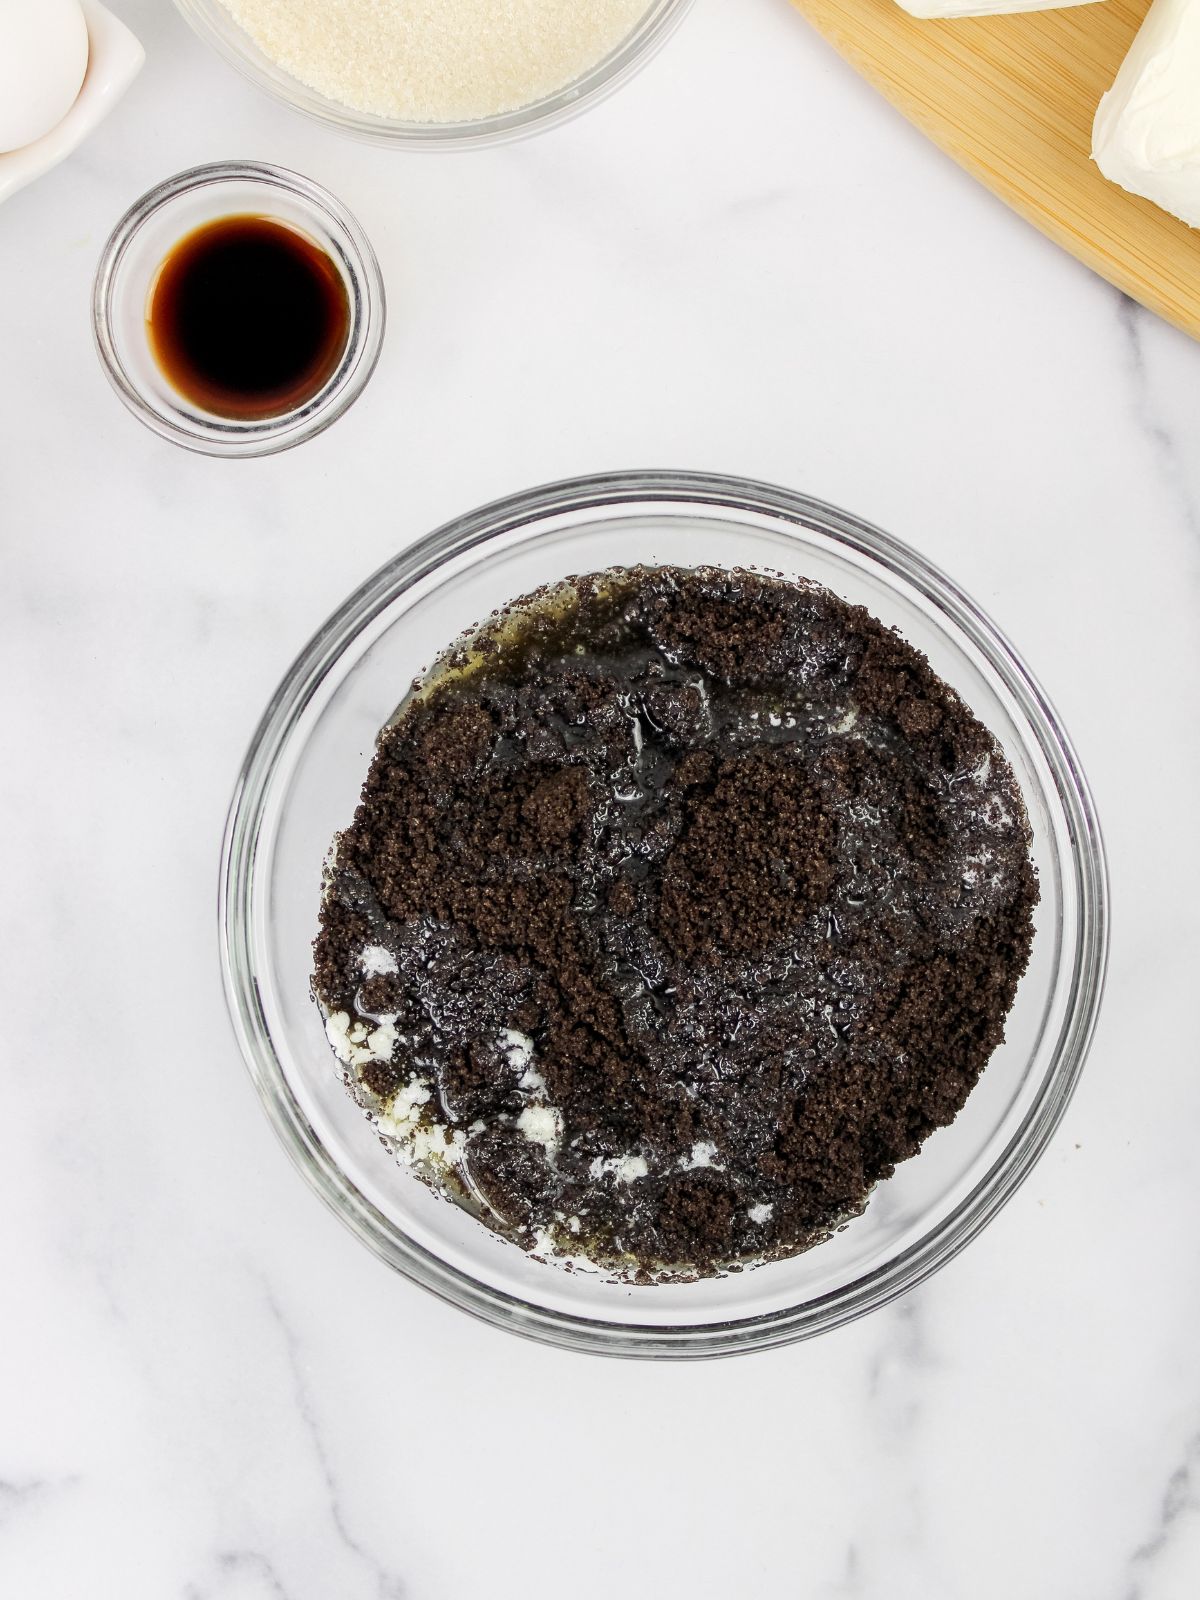 Add melted butter to sugar and Oreo cookie crumbs.